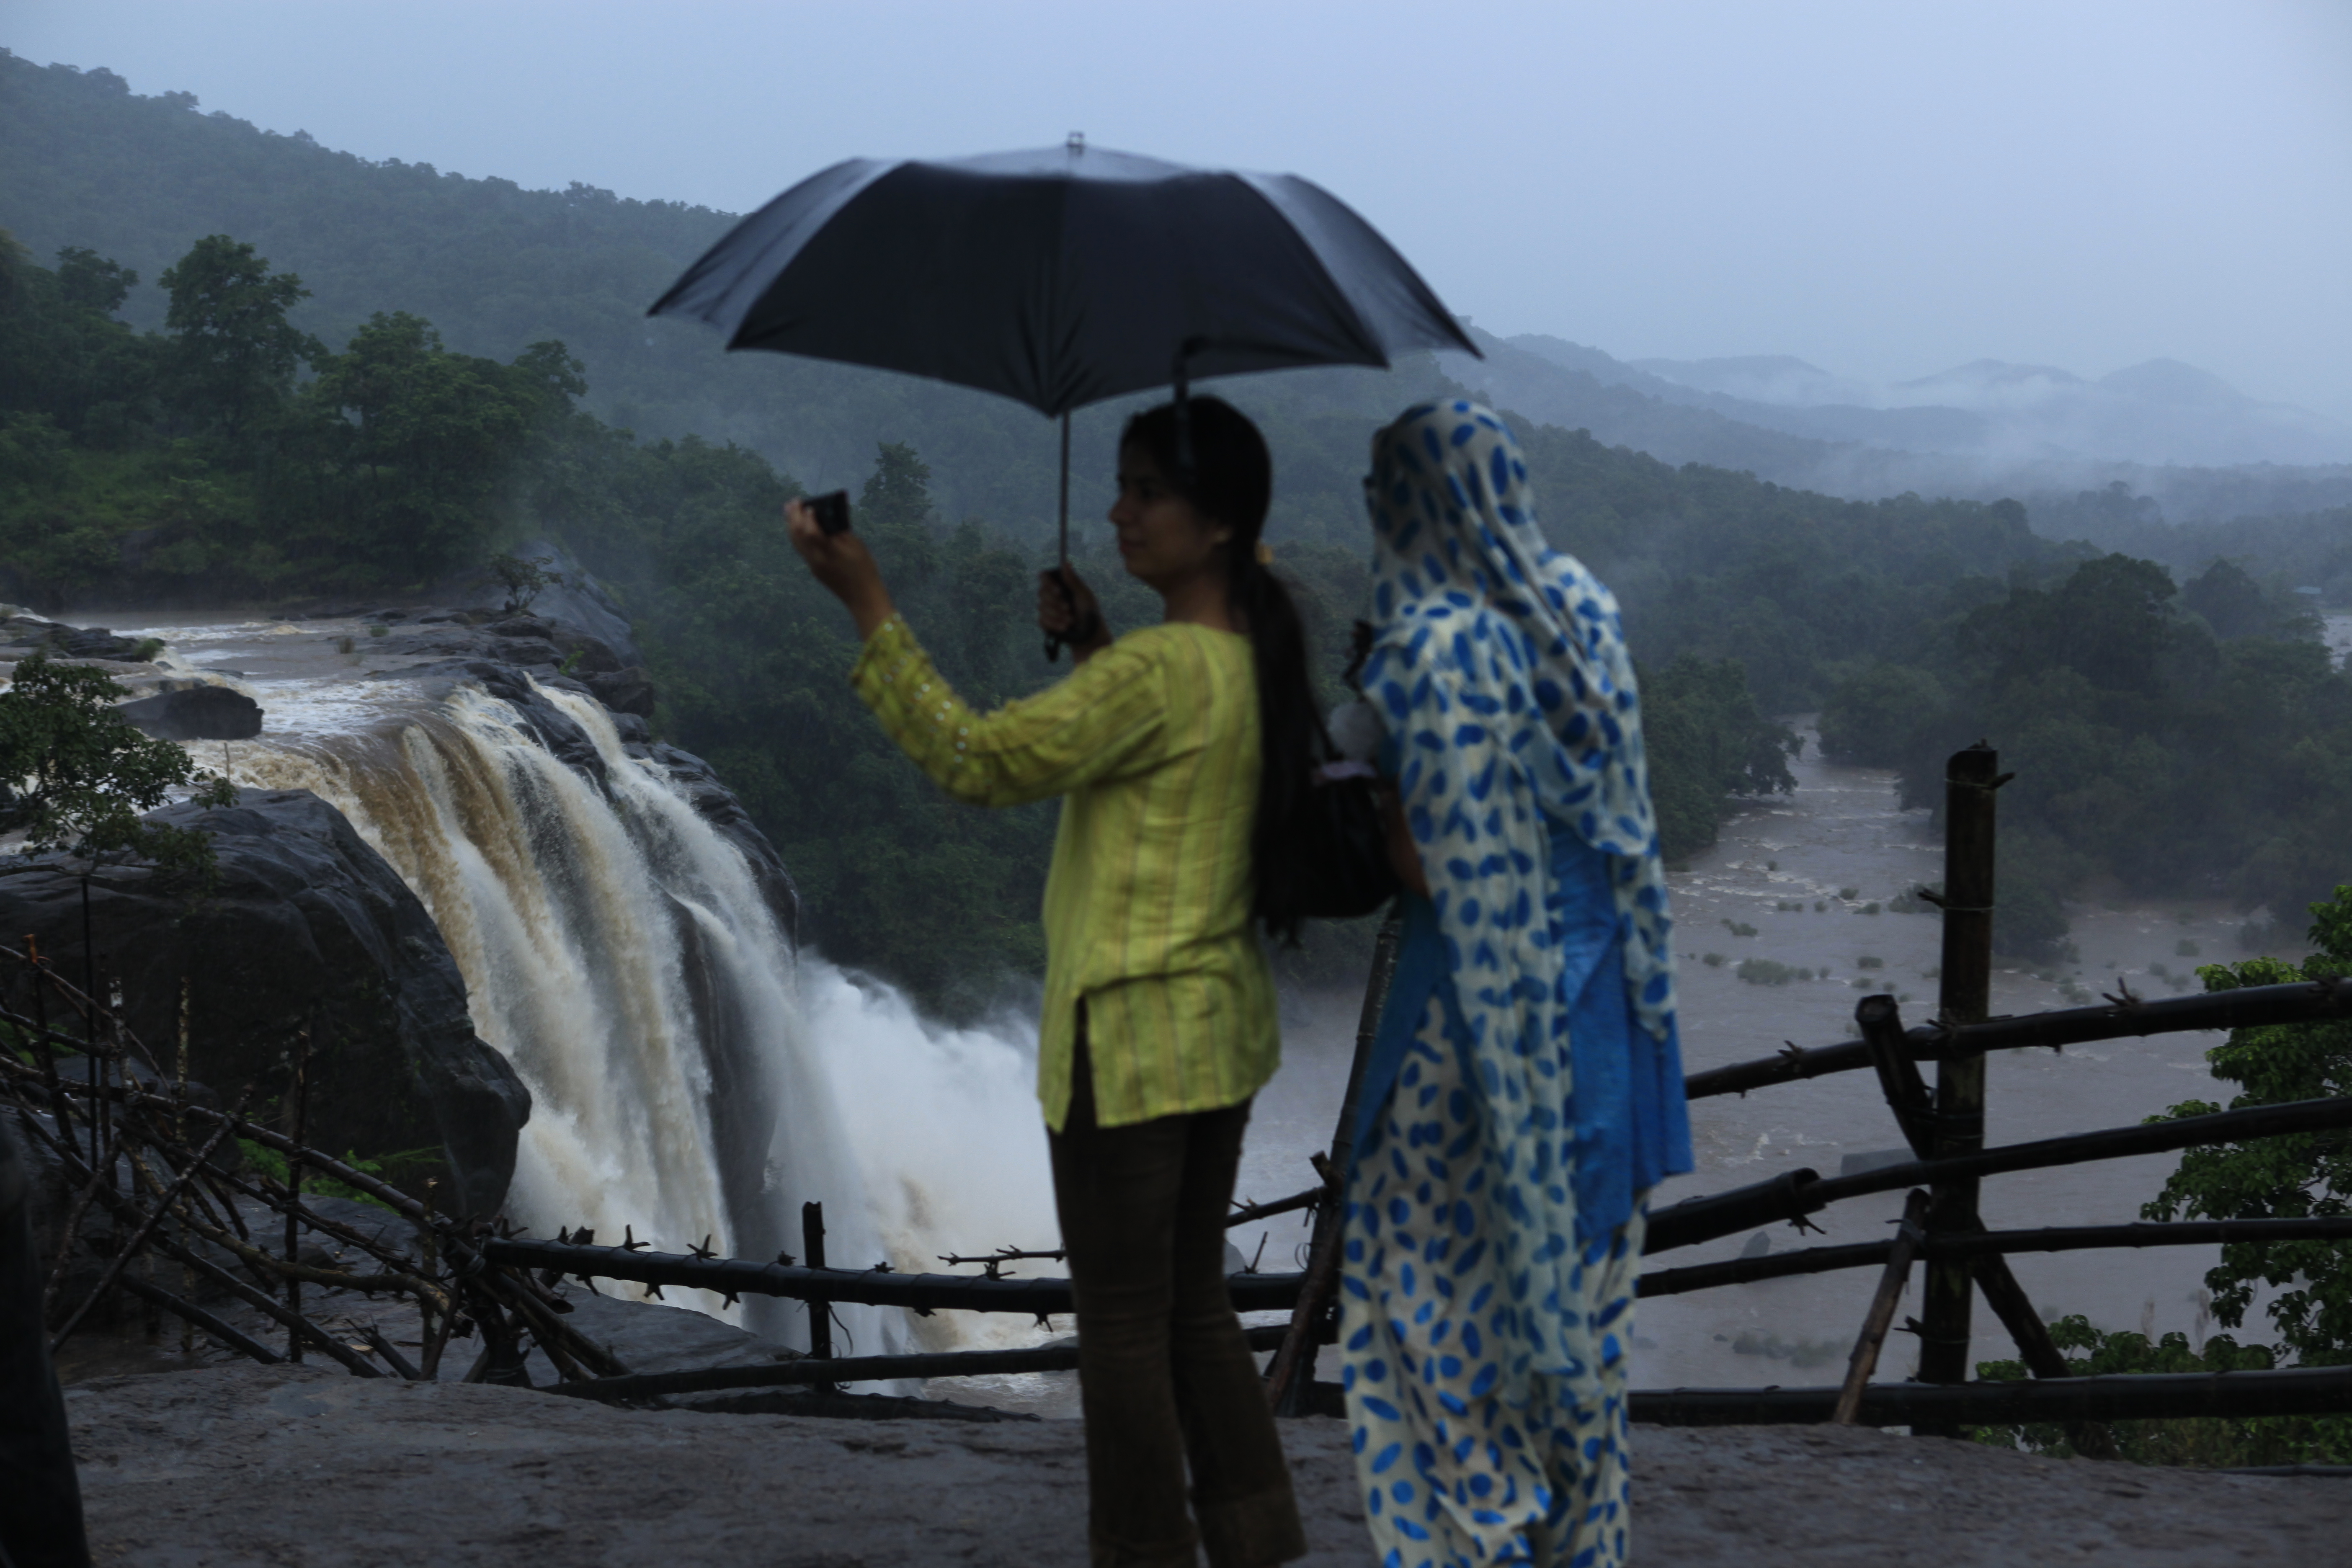 Athirapally Falls Wallpapers